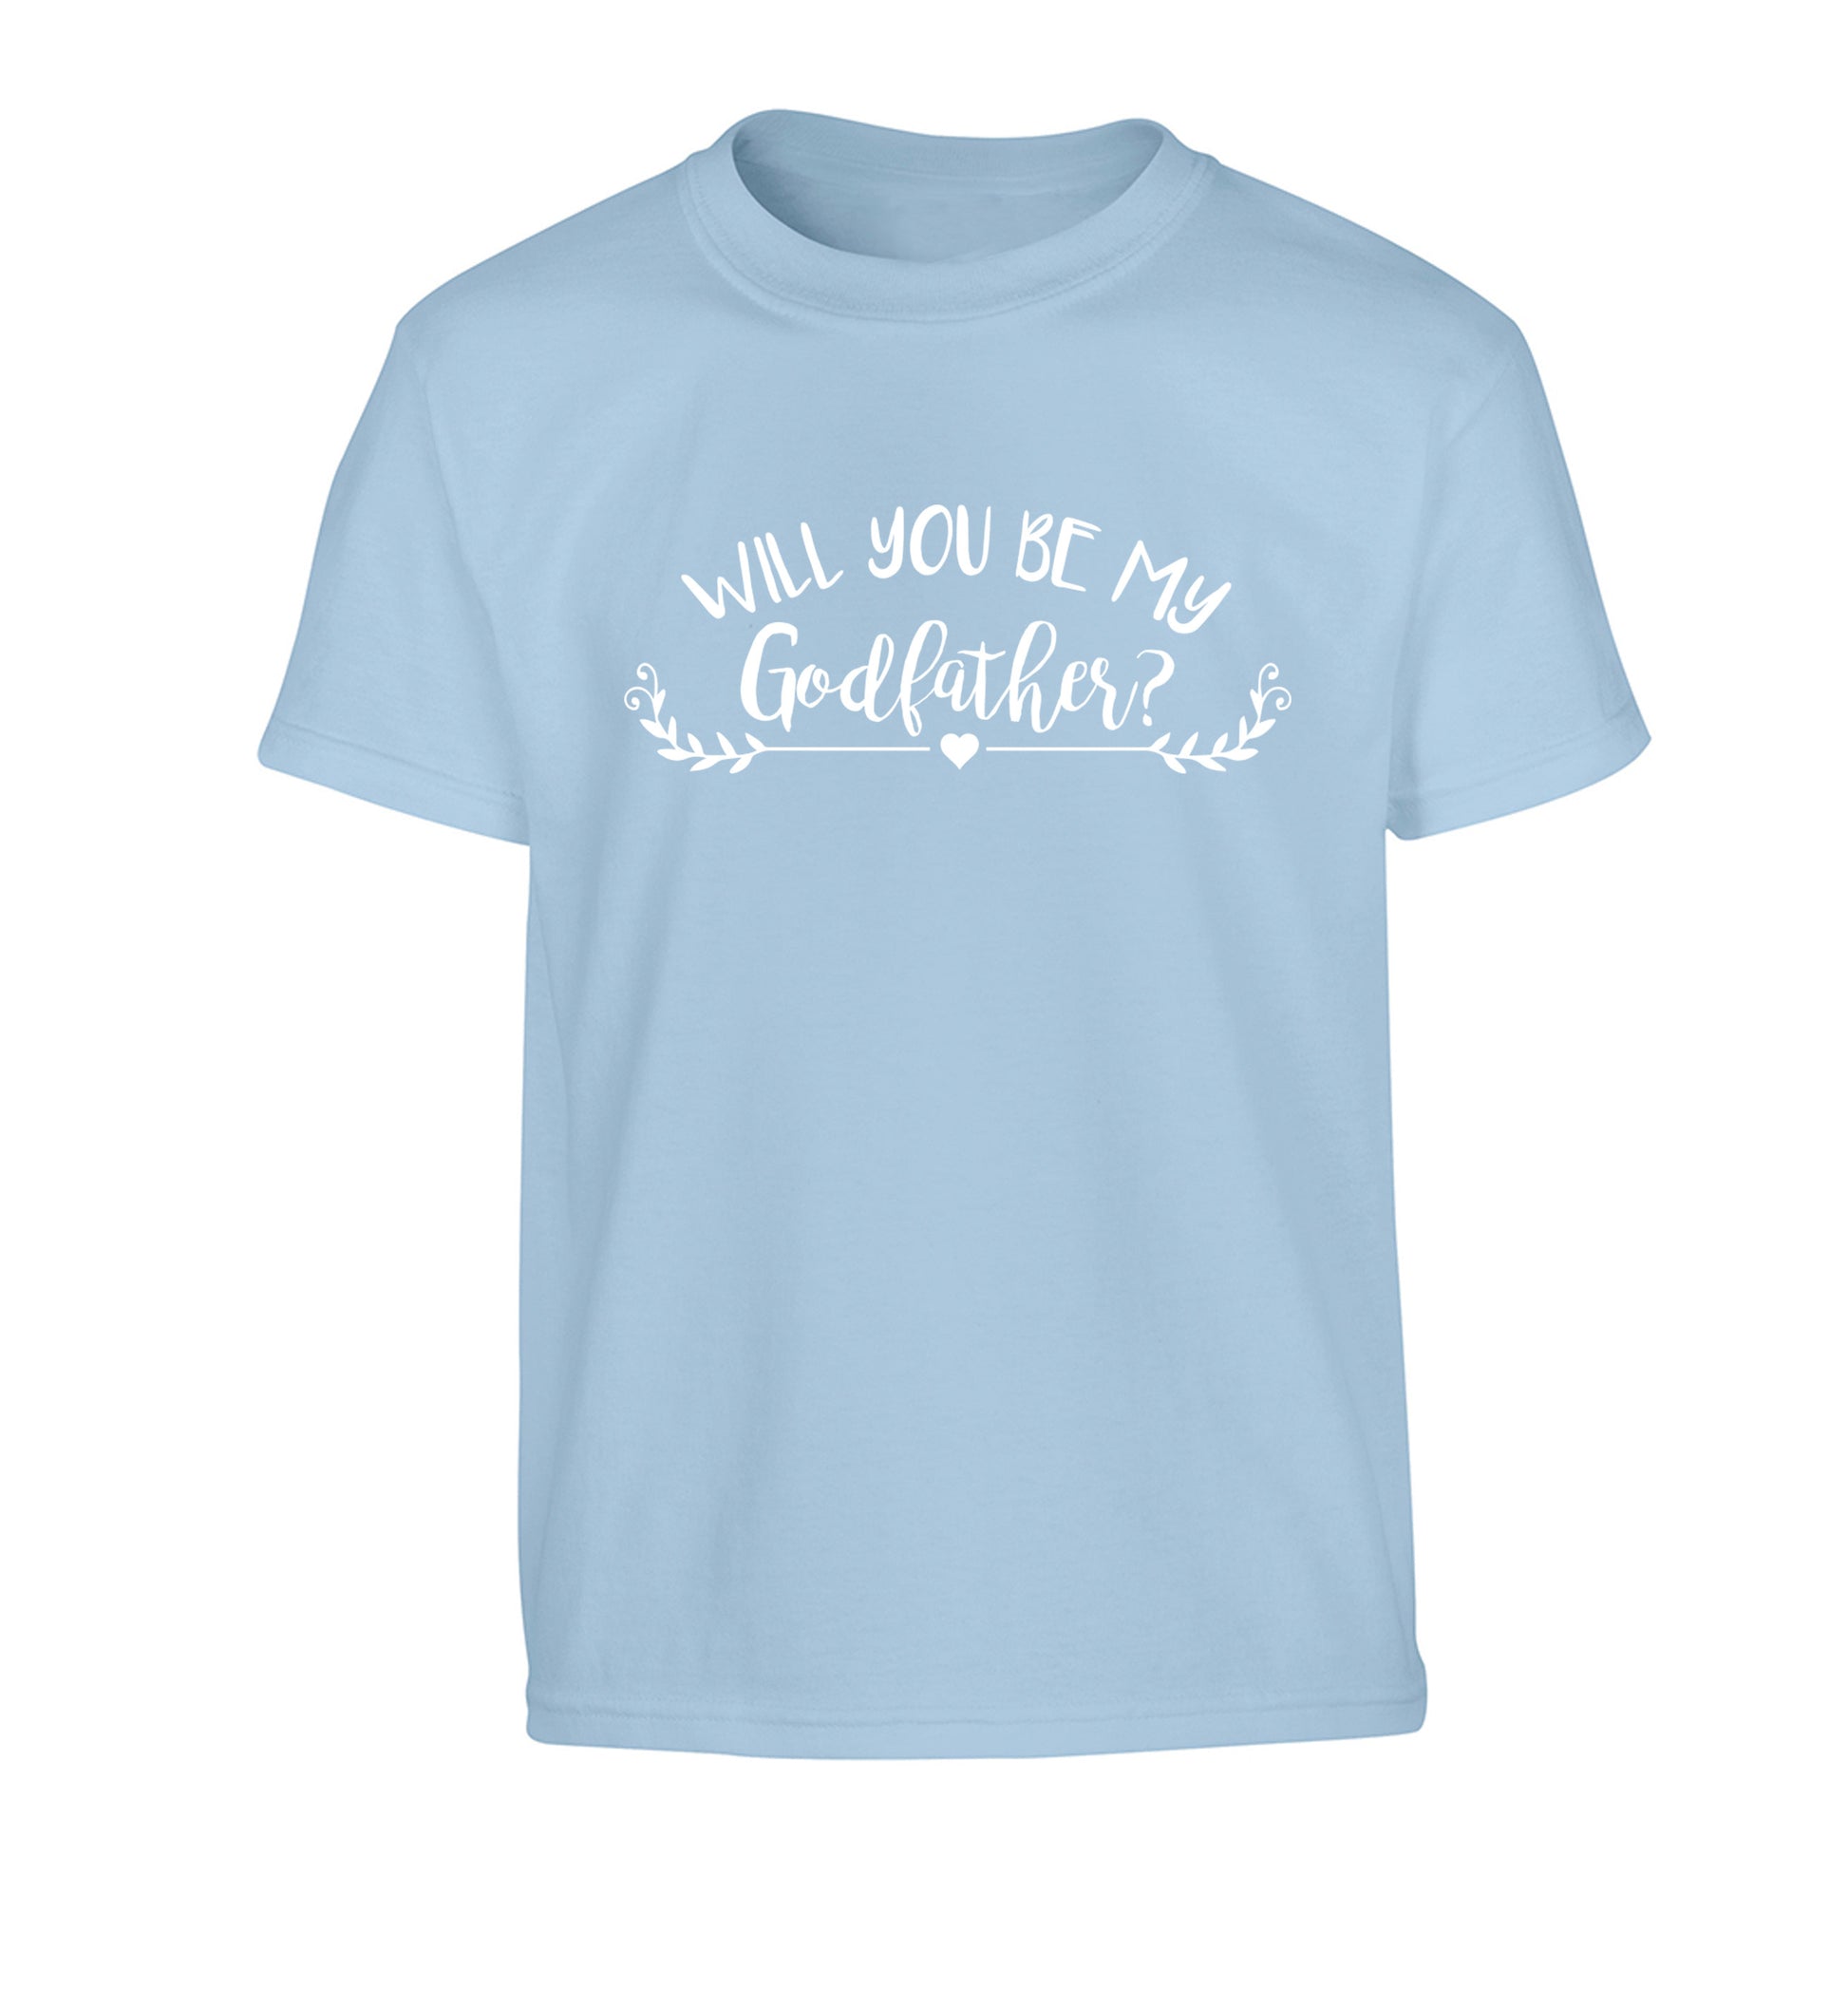 Will you be my godfather? Children's light blue Tshirt 12-14 Years